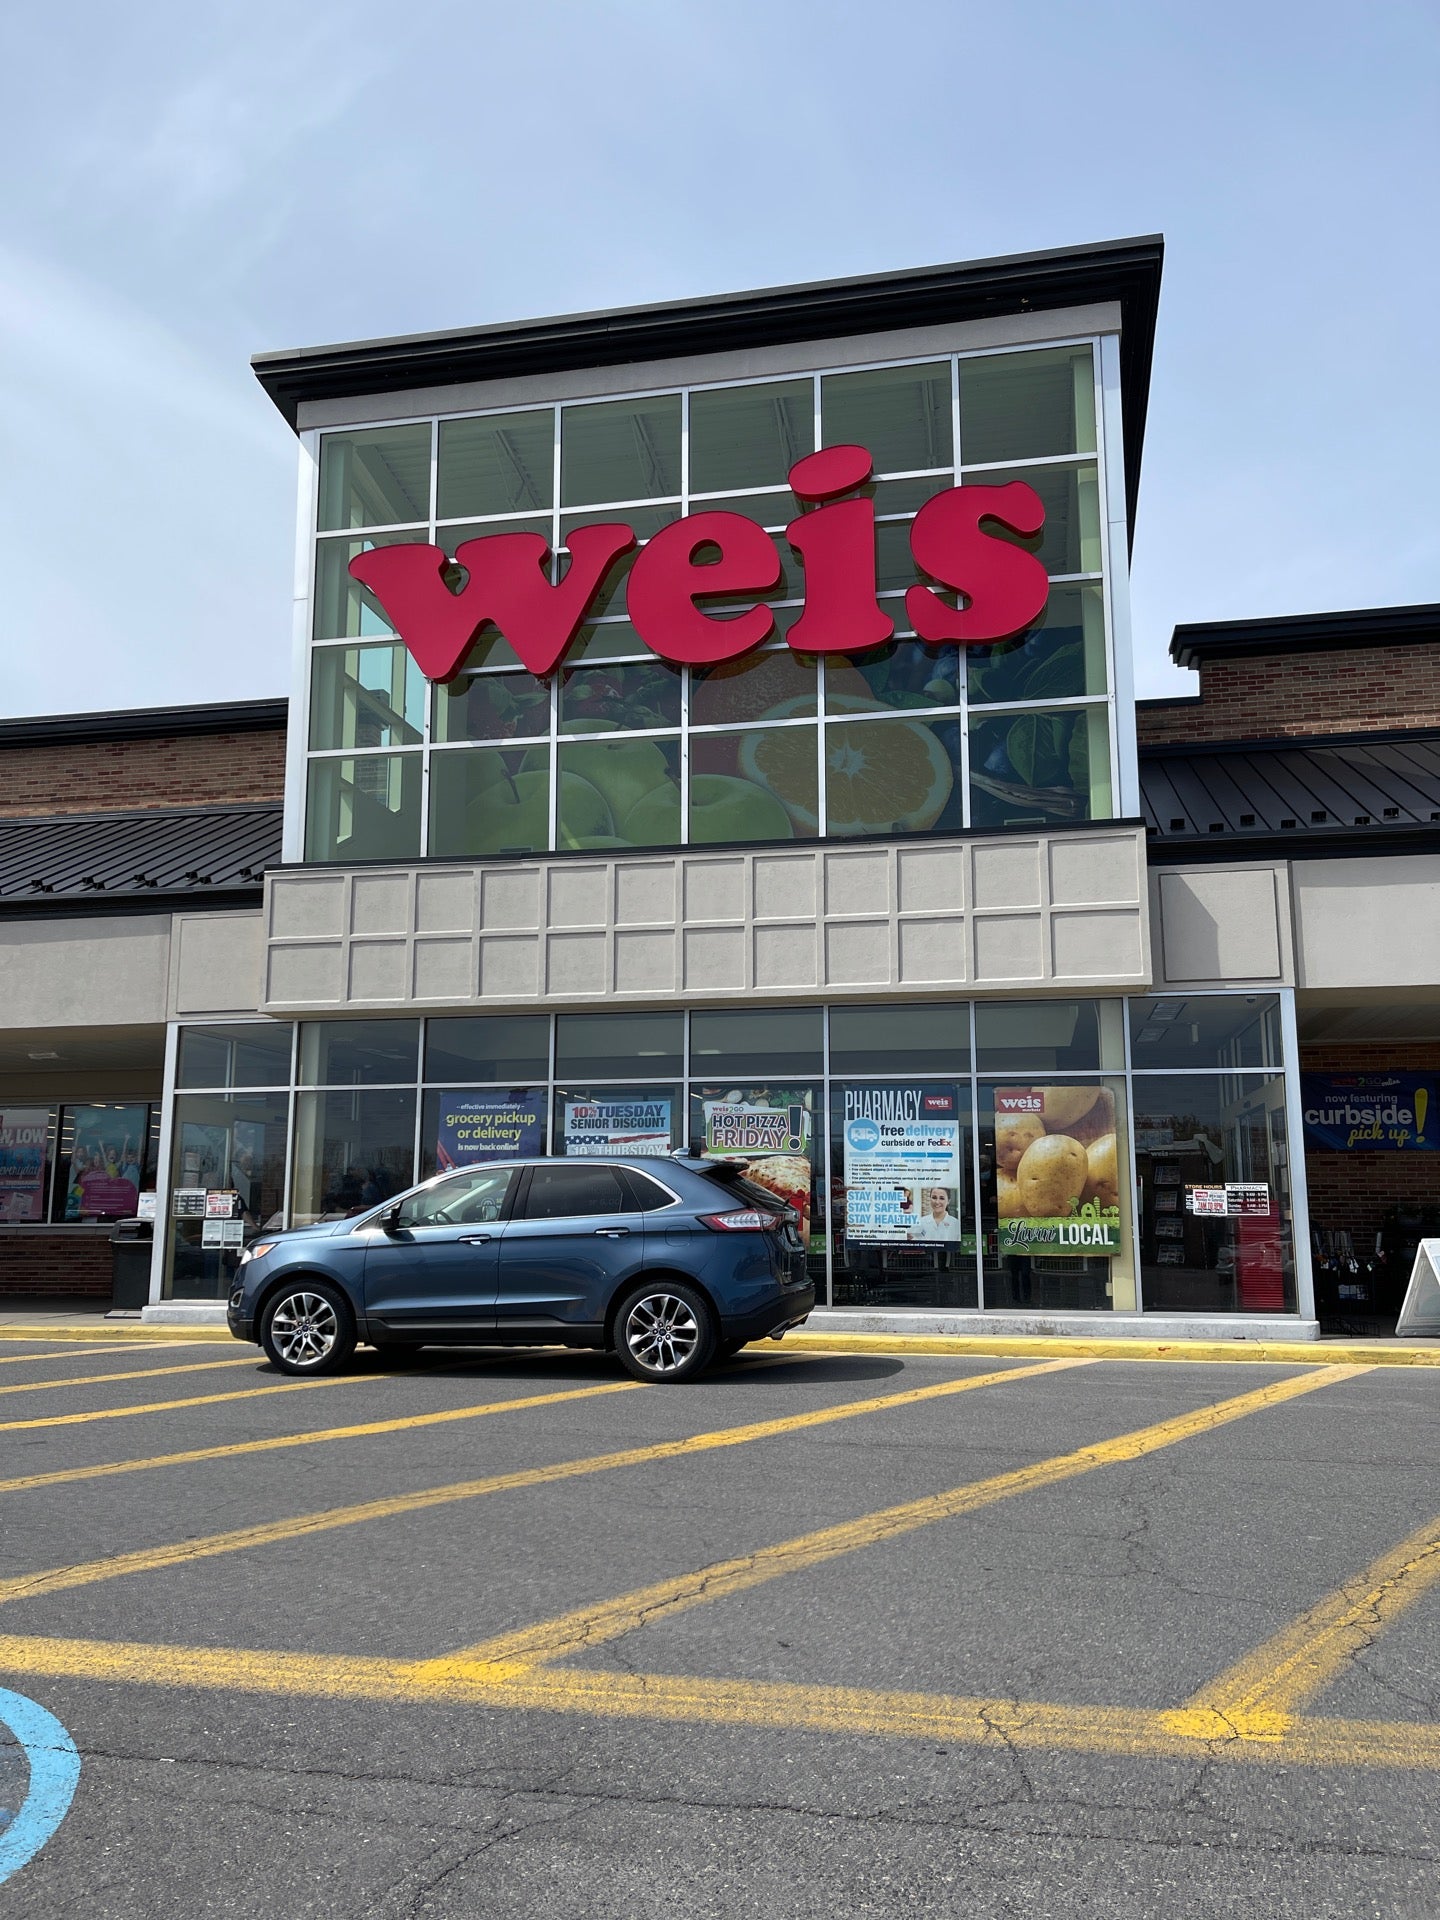 Weis Markets in west Allentown to get beer cafe – The Morning Call